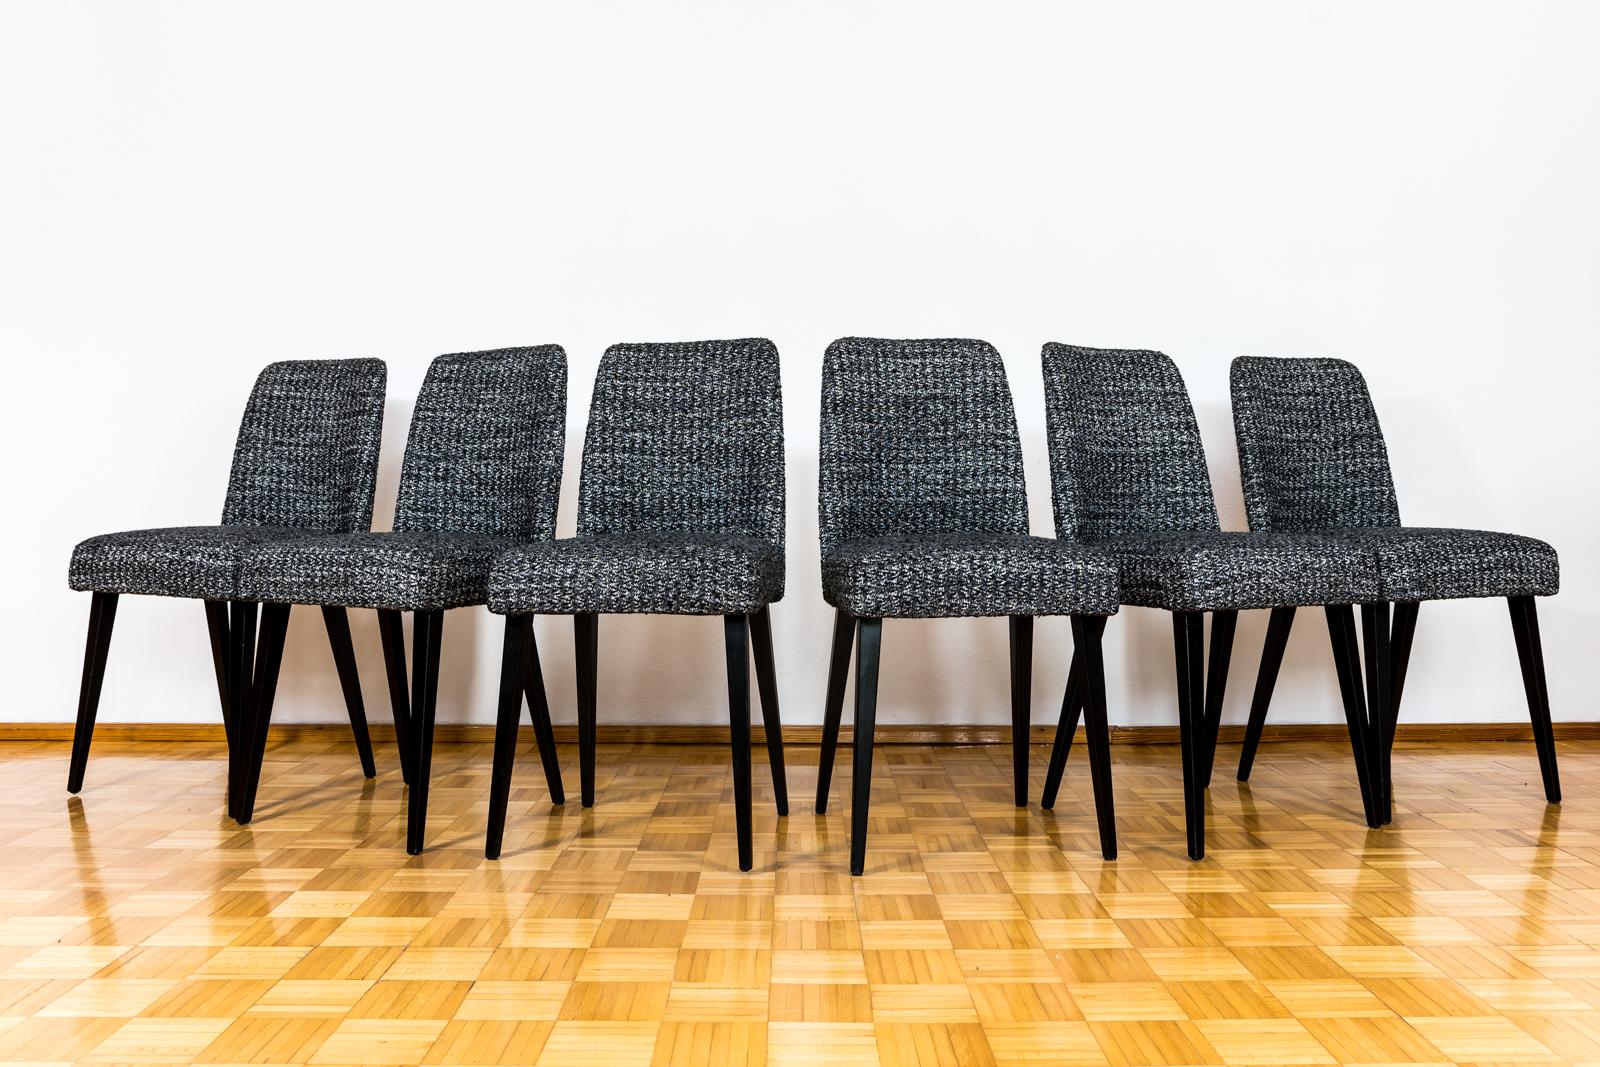 Set of 6 black Mid-Century chairs manufactured in Furniture Factory in Swarzedz, Poland 1960's.
Backrests are made of bent plywood, wooden legs have been completely restored and refinished.
Reupholstered in soft black-grey-white fabric.